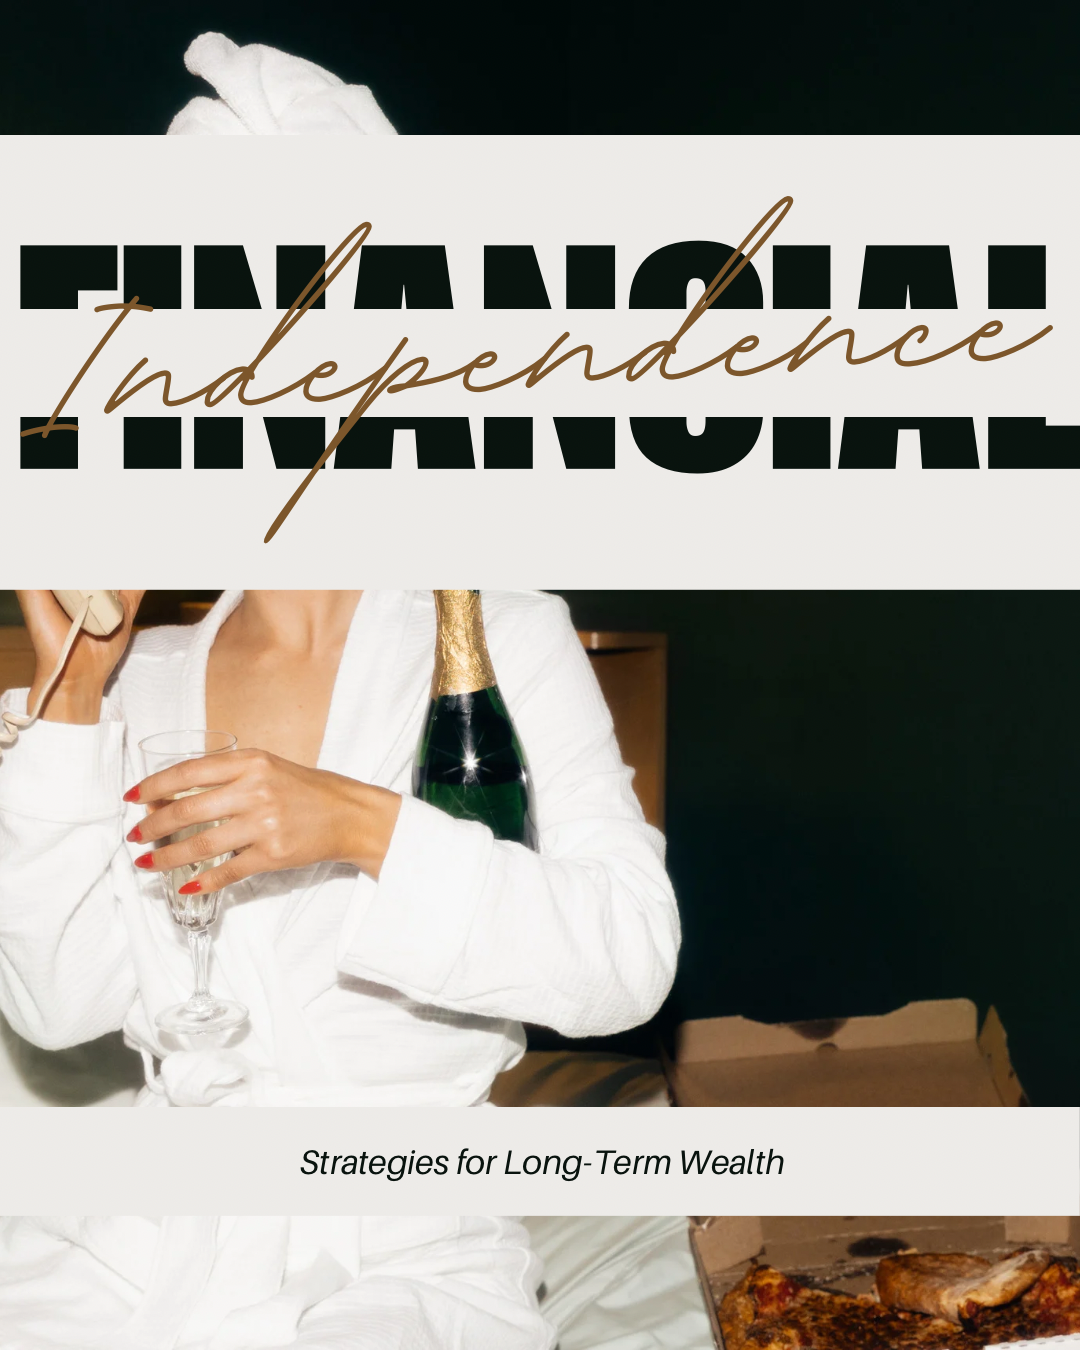 Building a Financially Independent Future: Strategies for Long-Term Wealth